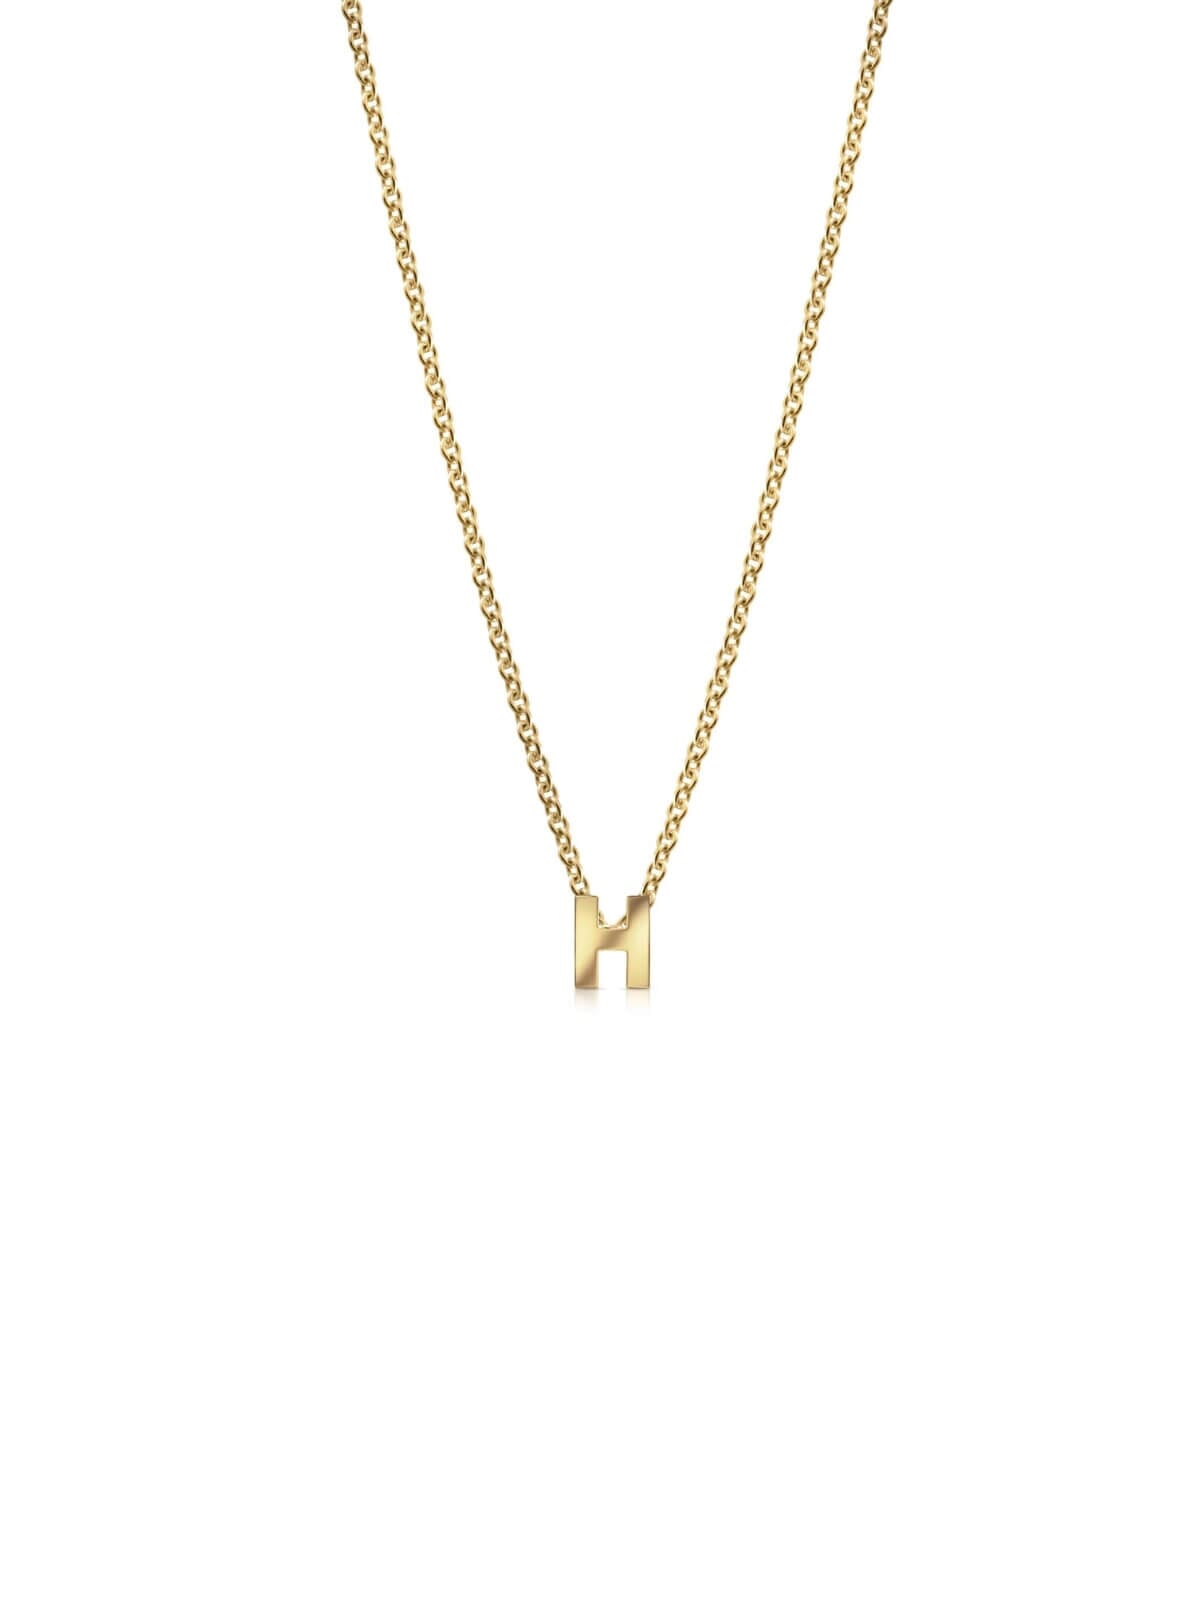 Initial Pendant Necklace - H - Gold Necklaces BIANKO 